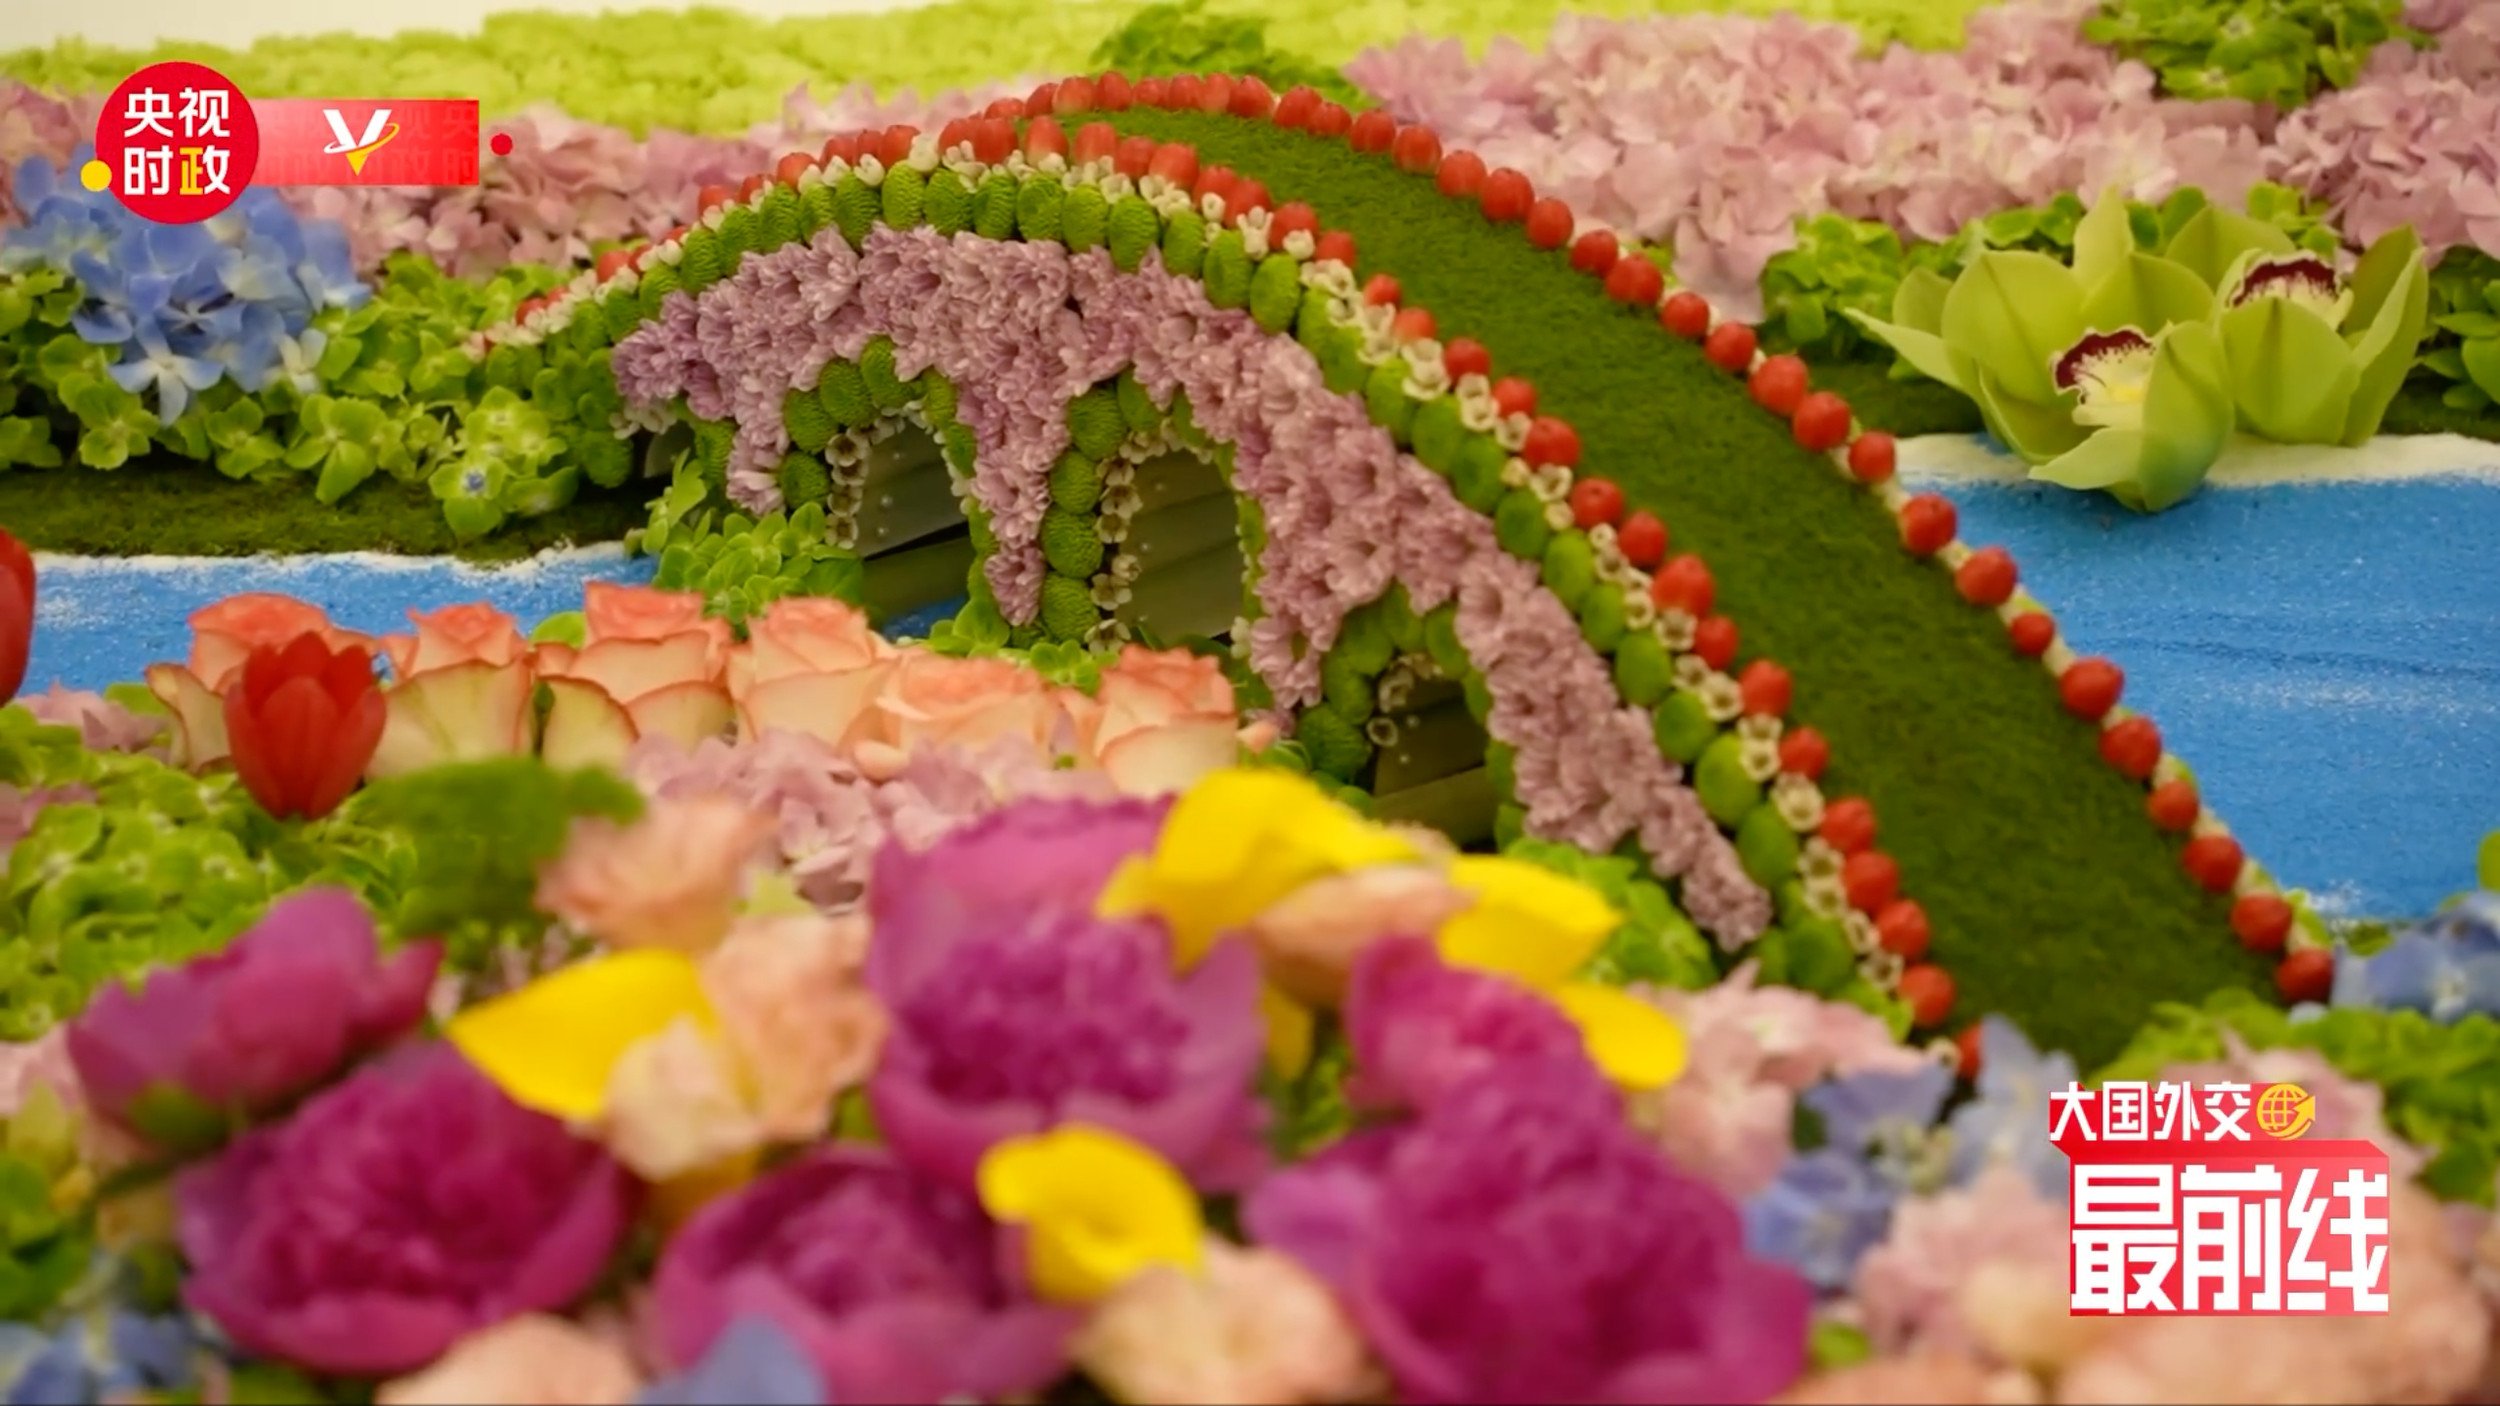 At Henry Kissinger’s lunch with Chinese President Xi Jinping, the table decorations included a sprawling miniature landscape featuring a bridge that state broadcaster CCTV said represented the “bridge between China and the United States”, seen here in this screenshot taken from the CCTV video. Photo: CCTV